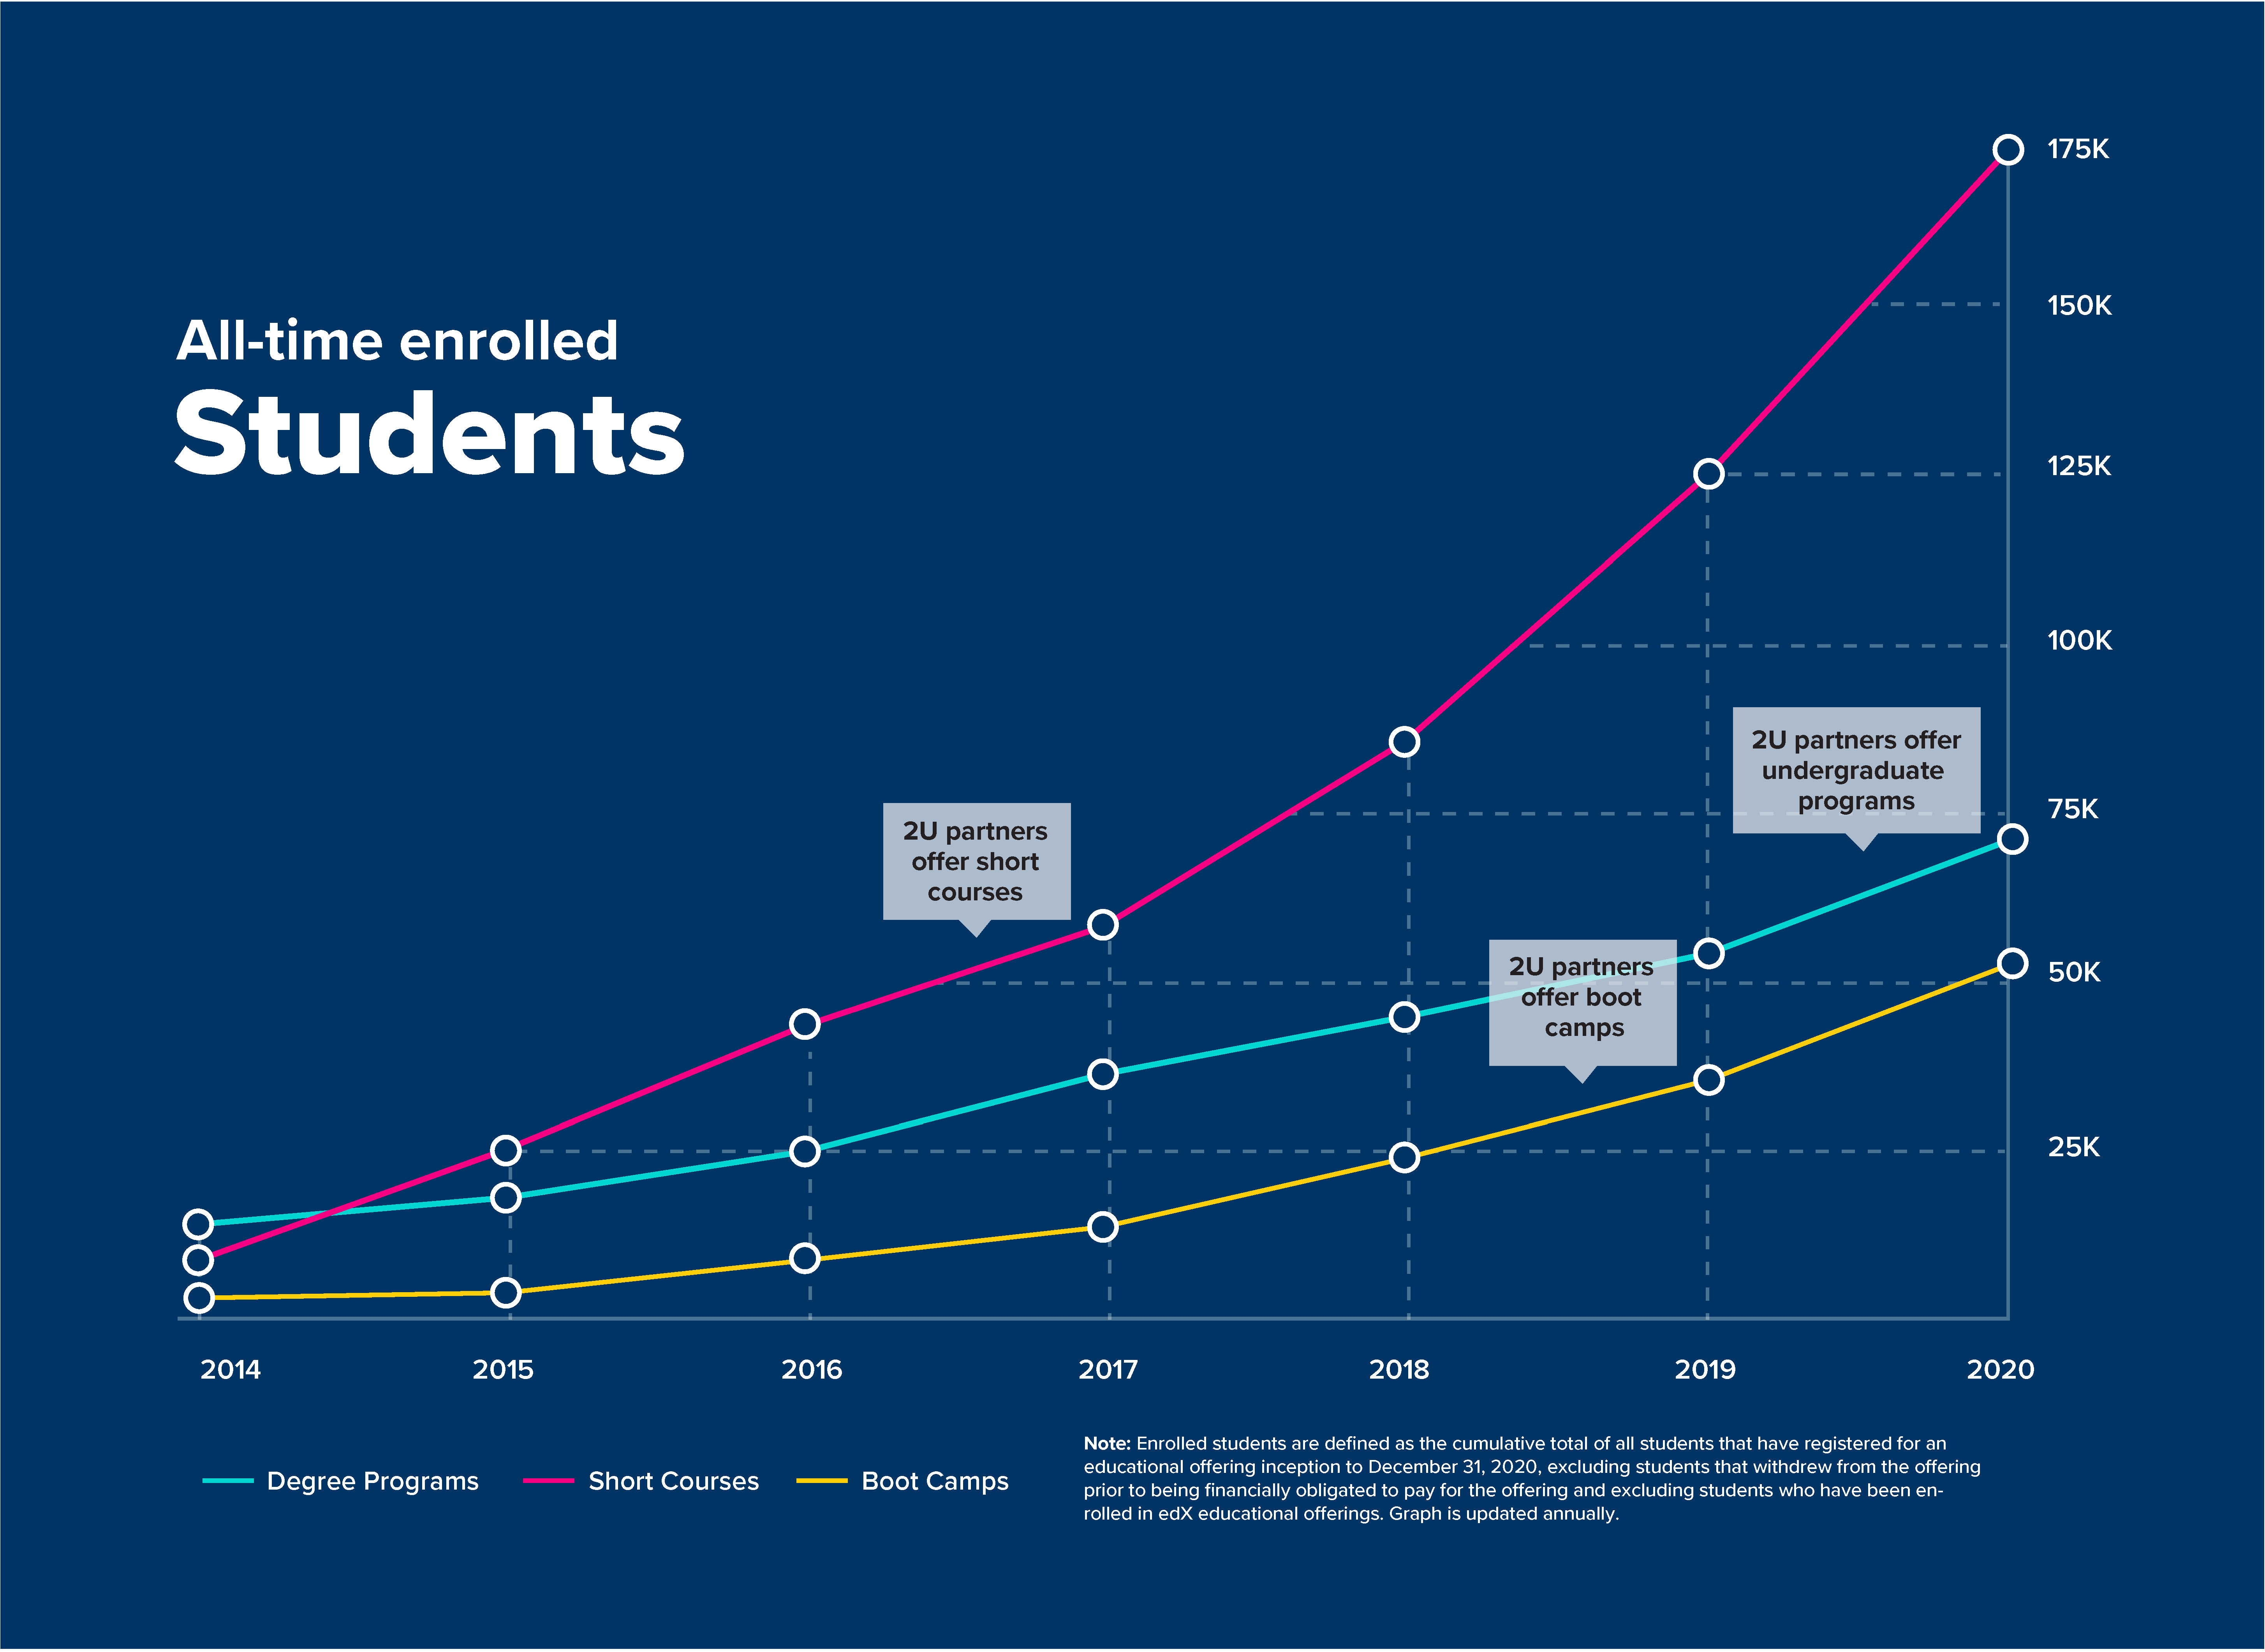 Graph showing all-time enrolled students totaling more than 300K.